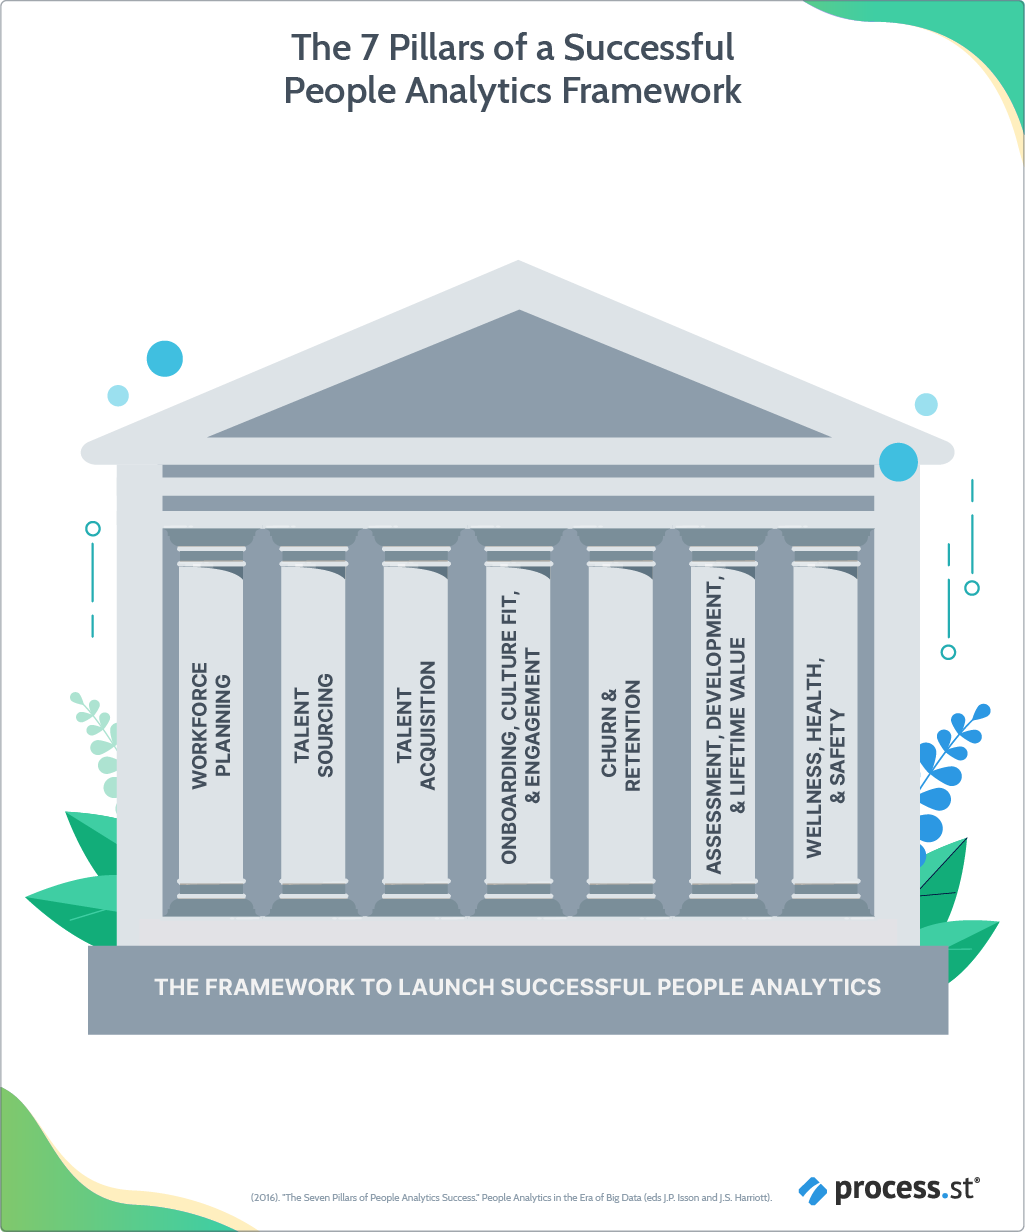 The 7 Pillars of a Successful People Analytics Framework